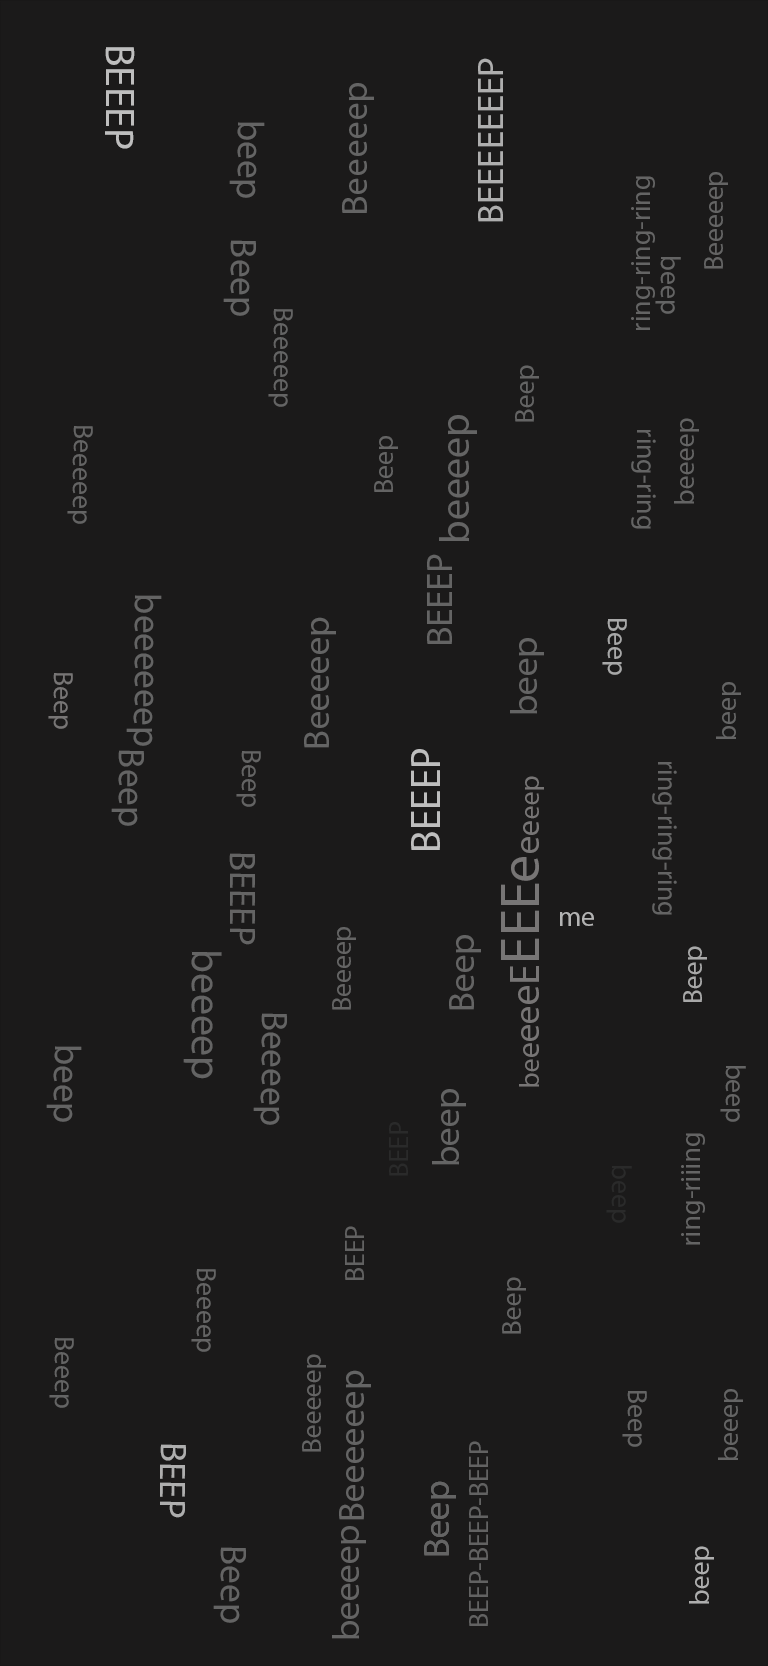 Beep Beep! A concrete poem expressing my experience of rush hour traffic in New Delhi, India